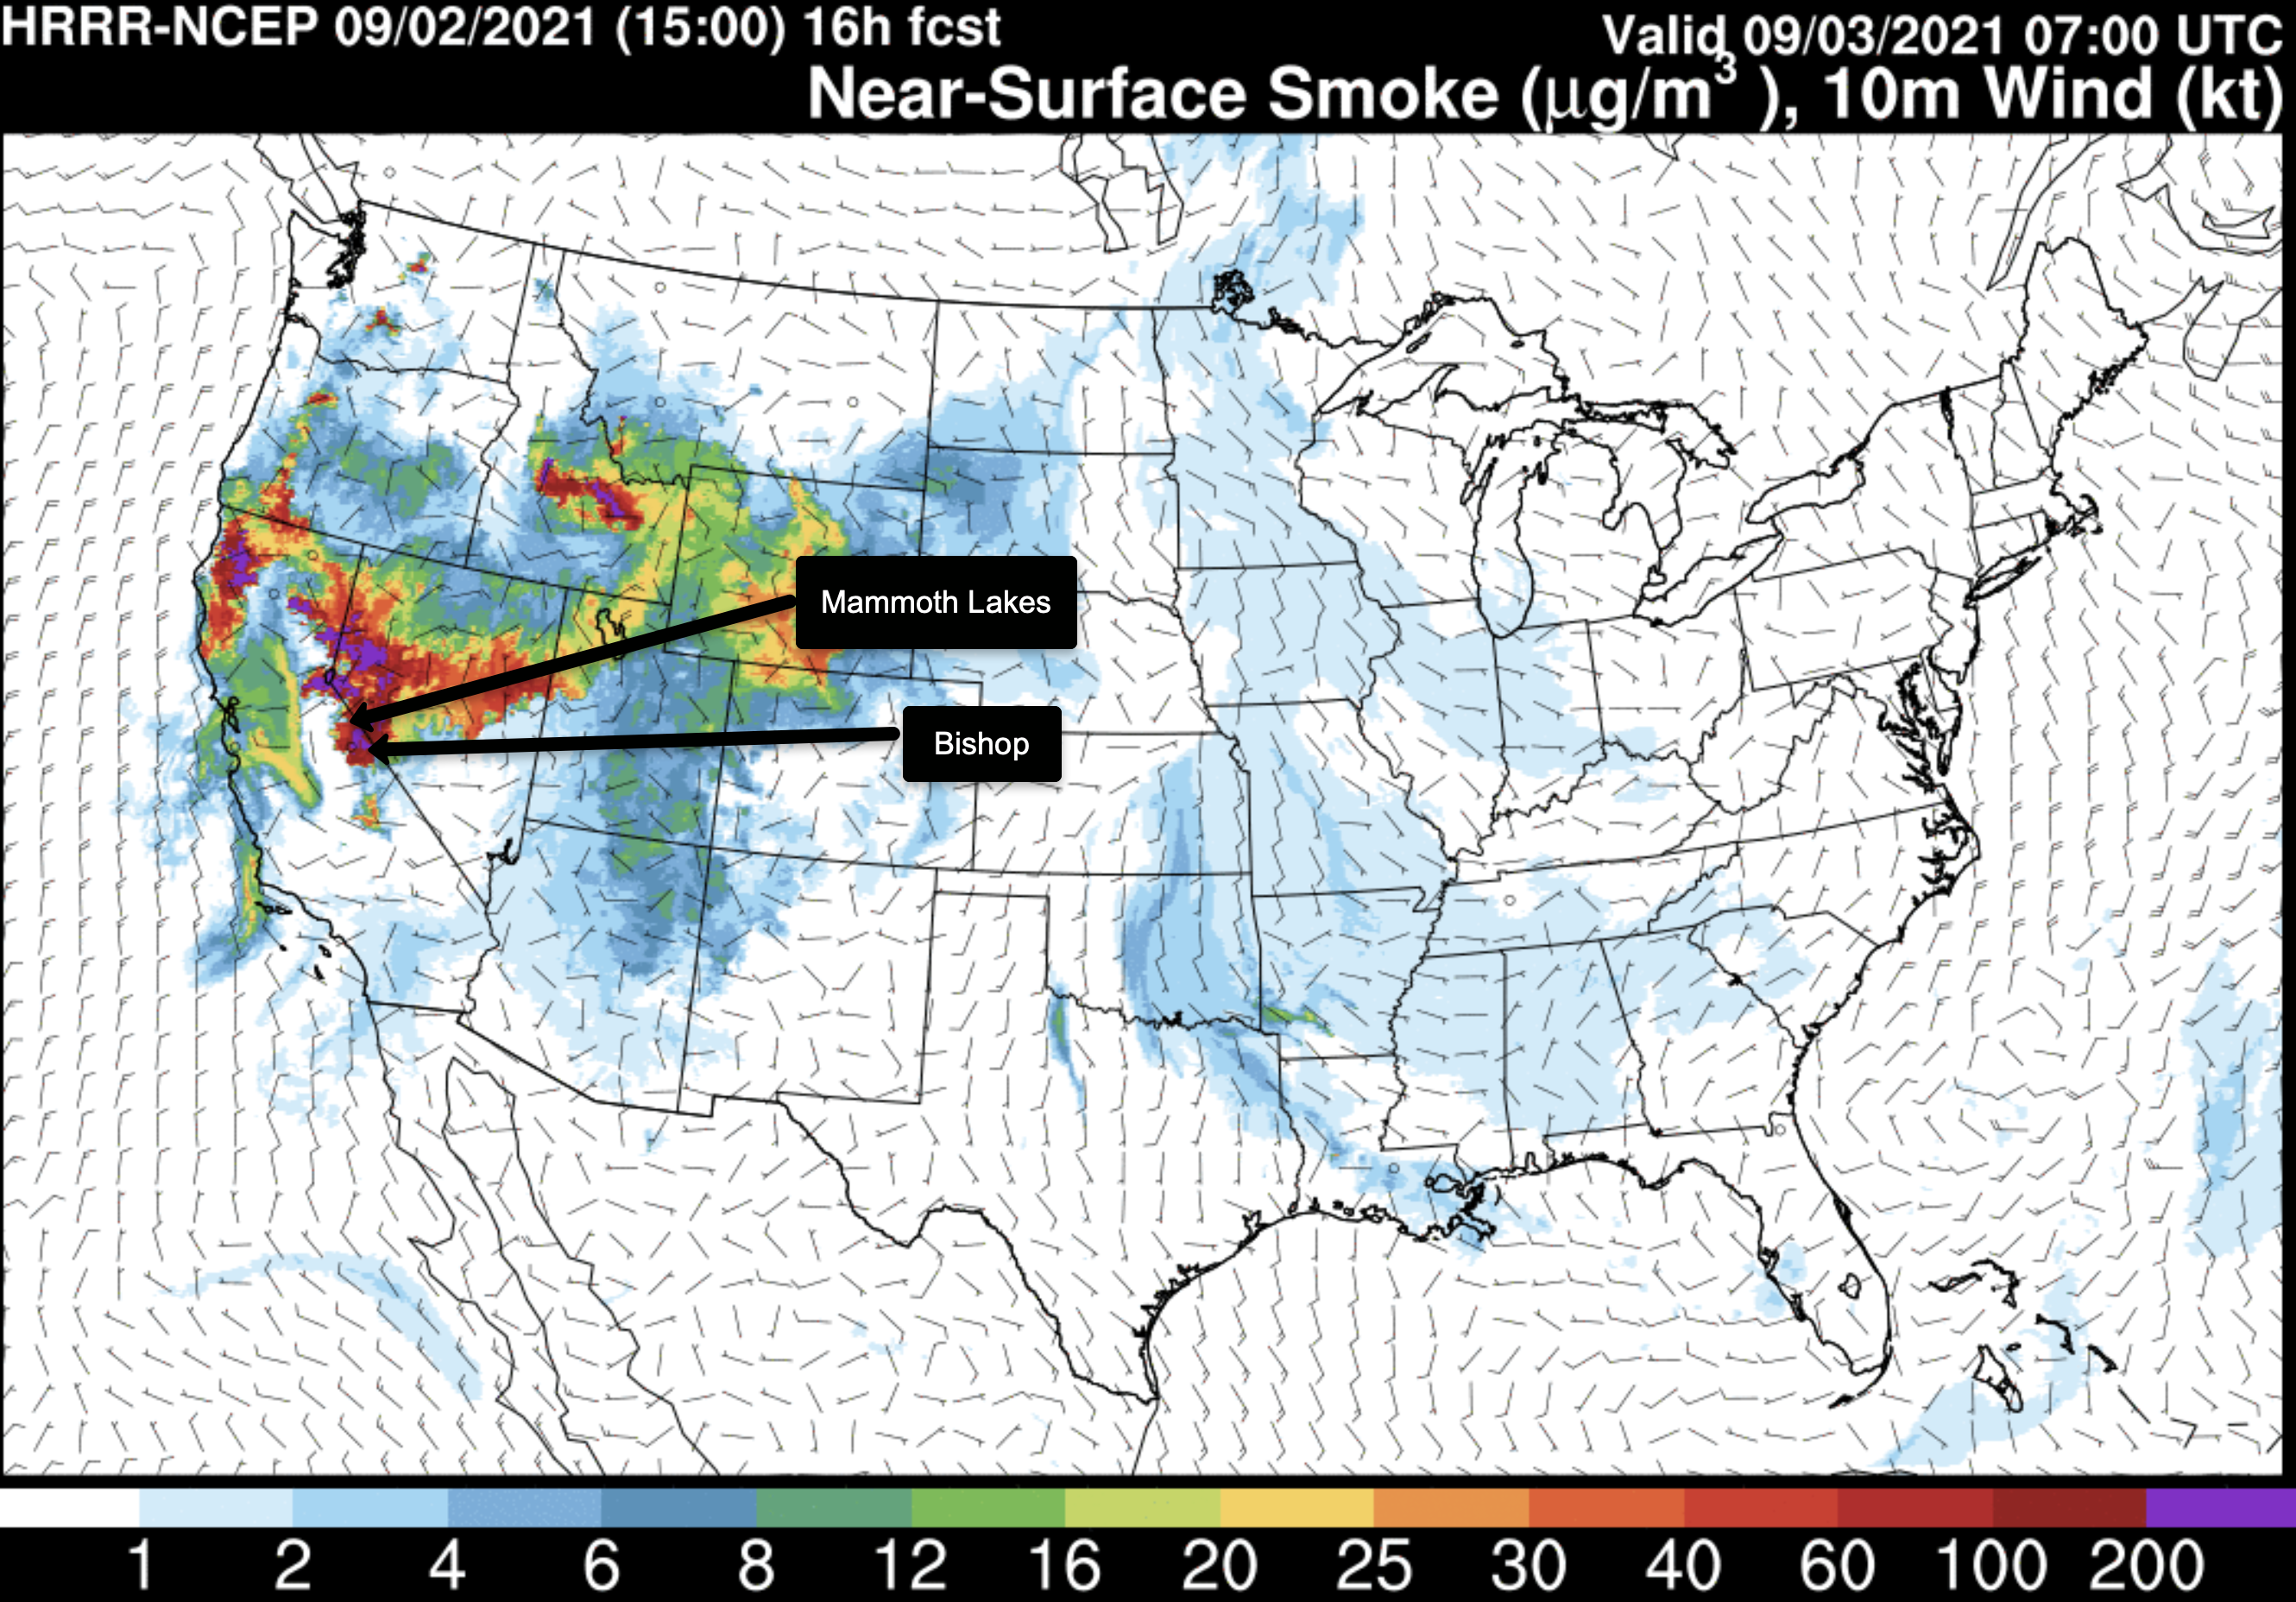 Air Quality Forecast for Friday at 10 AM - Moderate Levels of Haze and Smoke